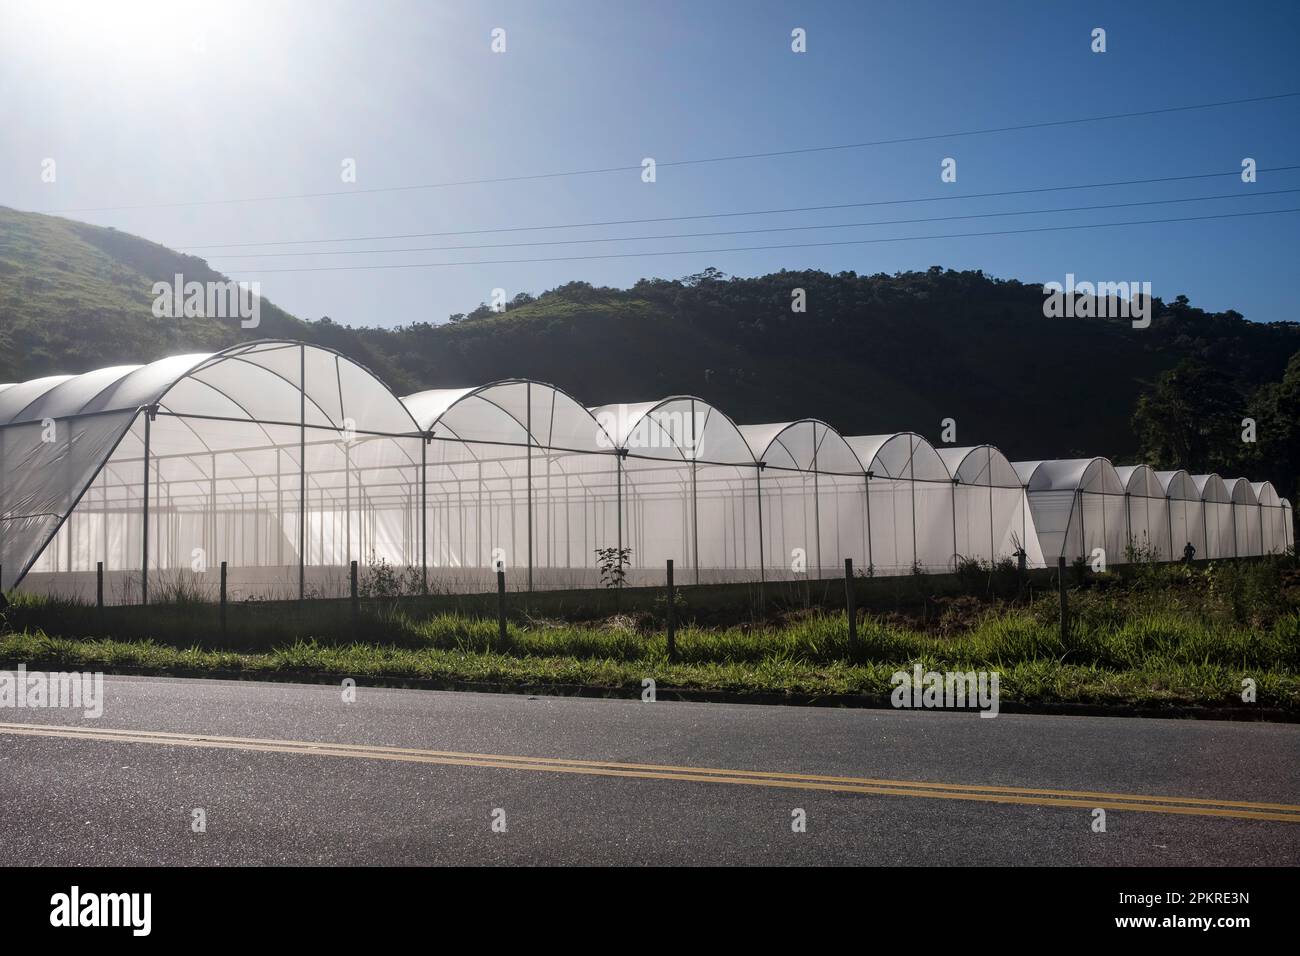 Greenhouse made of polycarbonate rigid plastics for regulating climatic conditions, such as temperature and humidity - the interior is exposed to sunlight, which rises the internal temperature for sheltering the plants from cold weather. Cachoeiras de Macacu, Rio de Janeiro, Brazil. Stock Photo